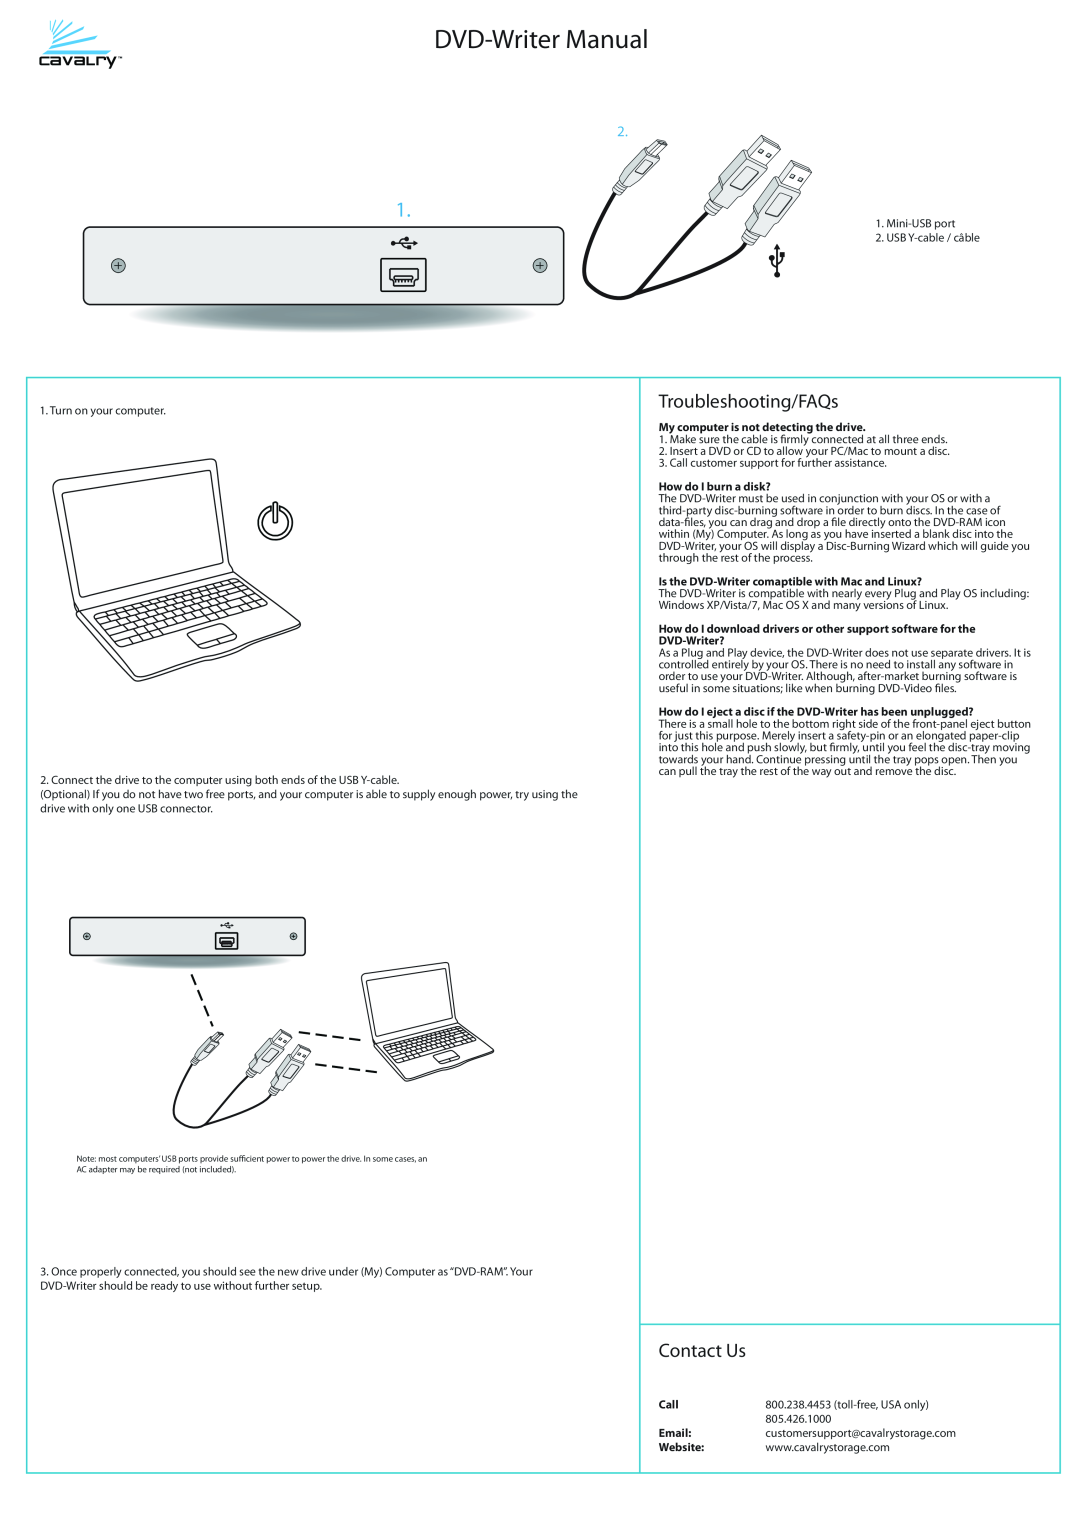 Cavalry Storage Blu-ray Player manual DVD-Writer Manual, Troubleshooting/FAQs, Contact Us, How do I burn a disk?, Call 